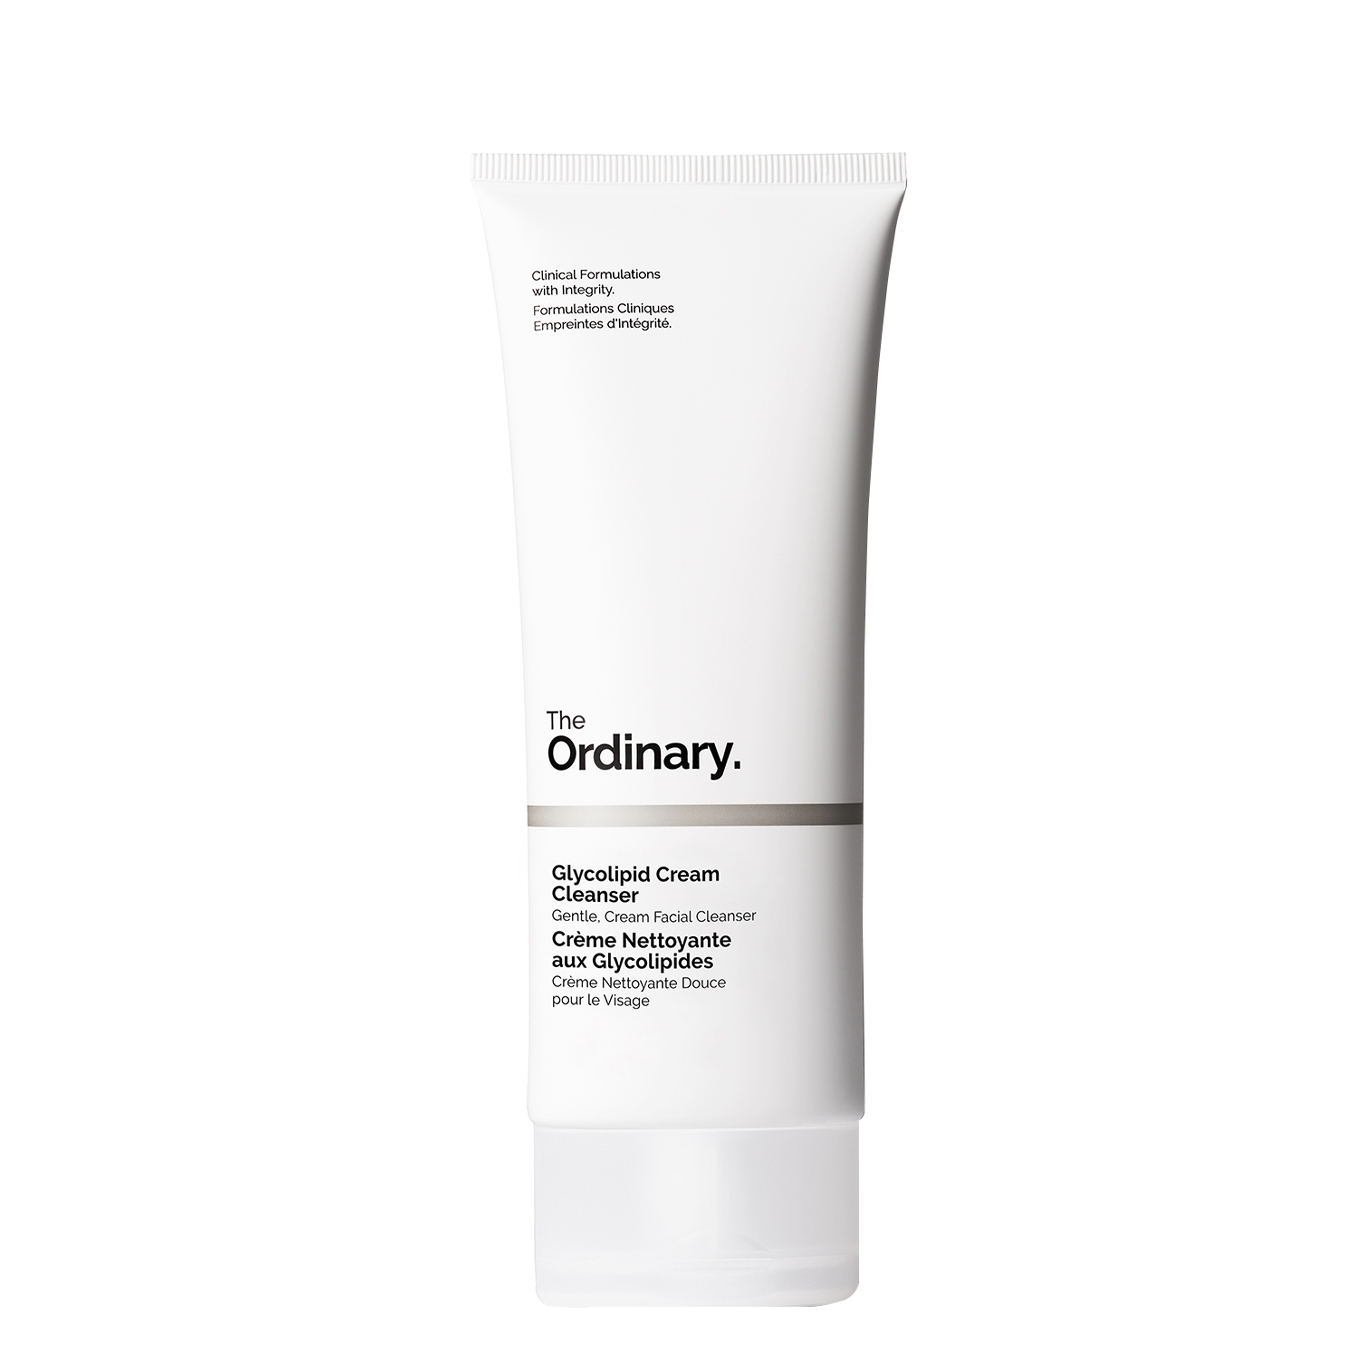 THE ORDINARY THE ORDINARY GLYCOLIPID CREAM CLEANSER 150ML